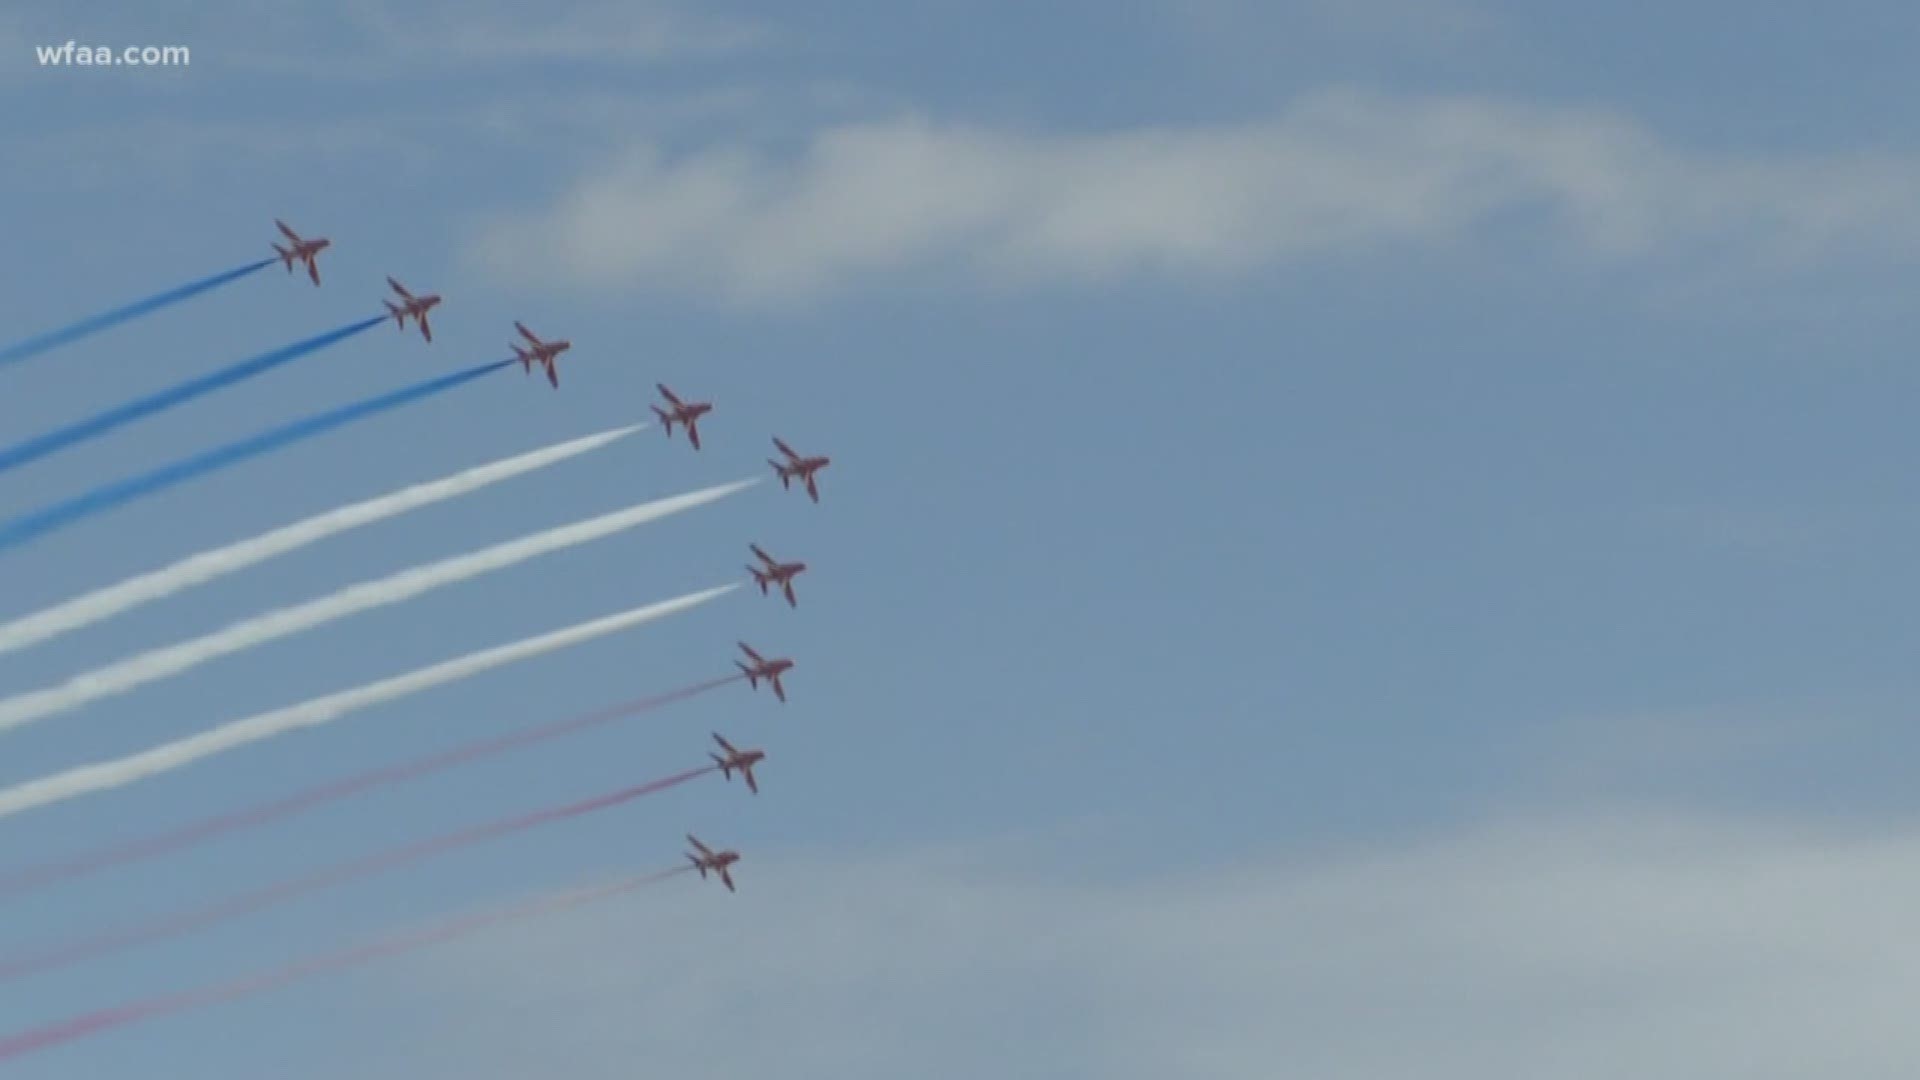 The Royal Air Force Red Arrows showed off their flight skills Thursday afternoon in Fort Worth. The team is touring North American, showing how pilots do things across the pond.